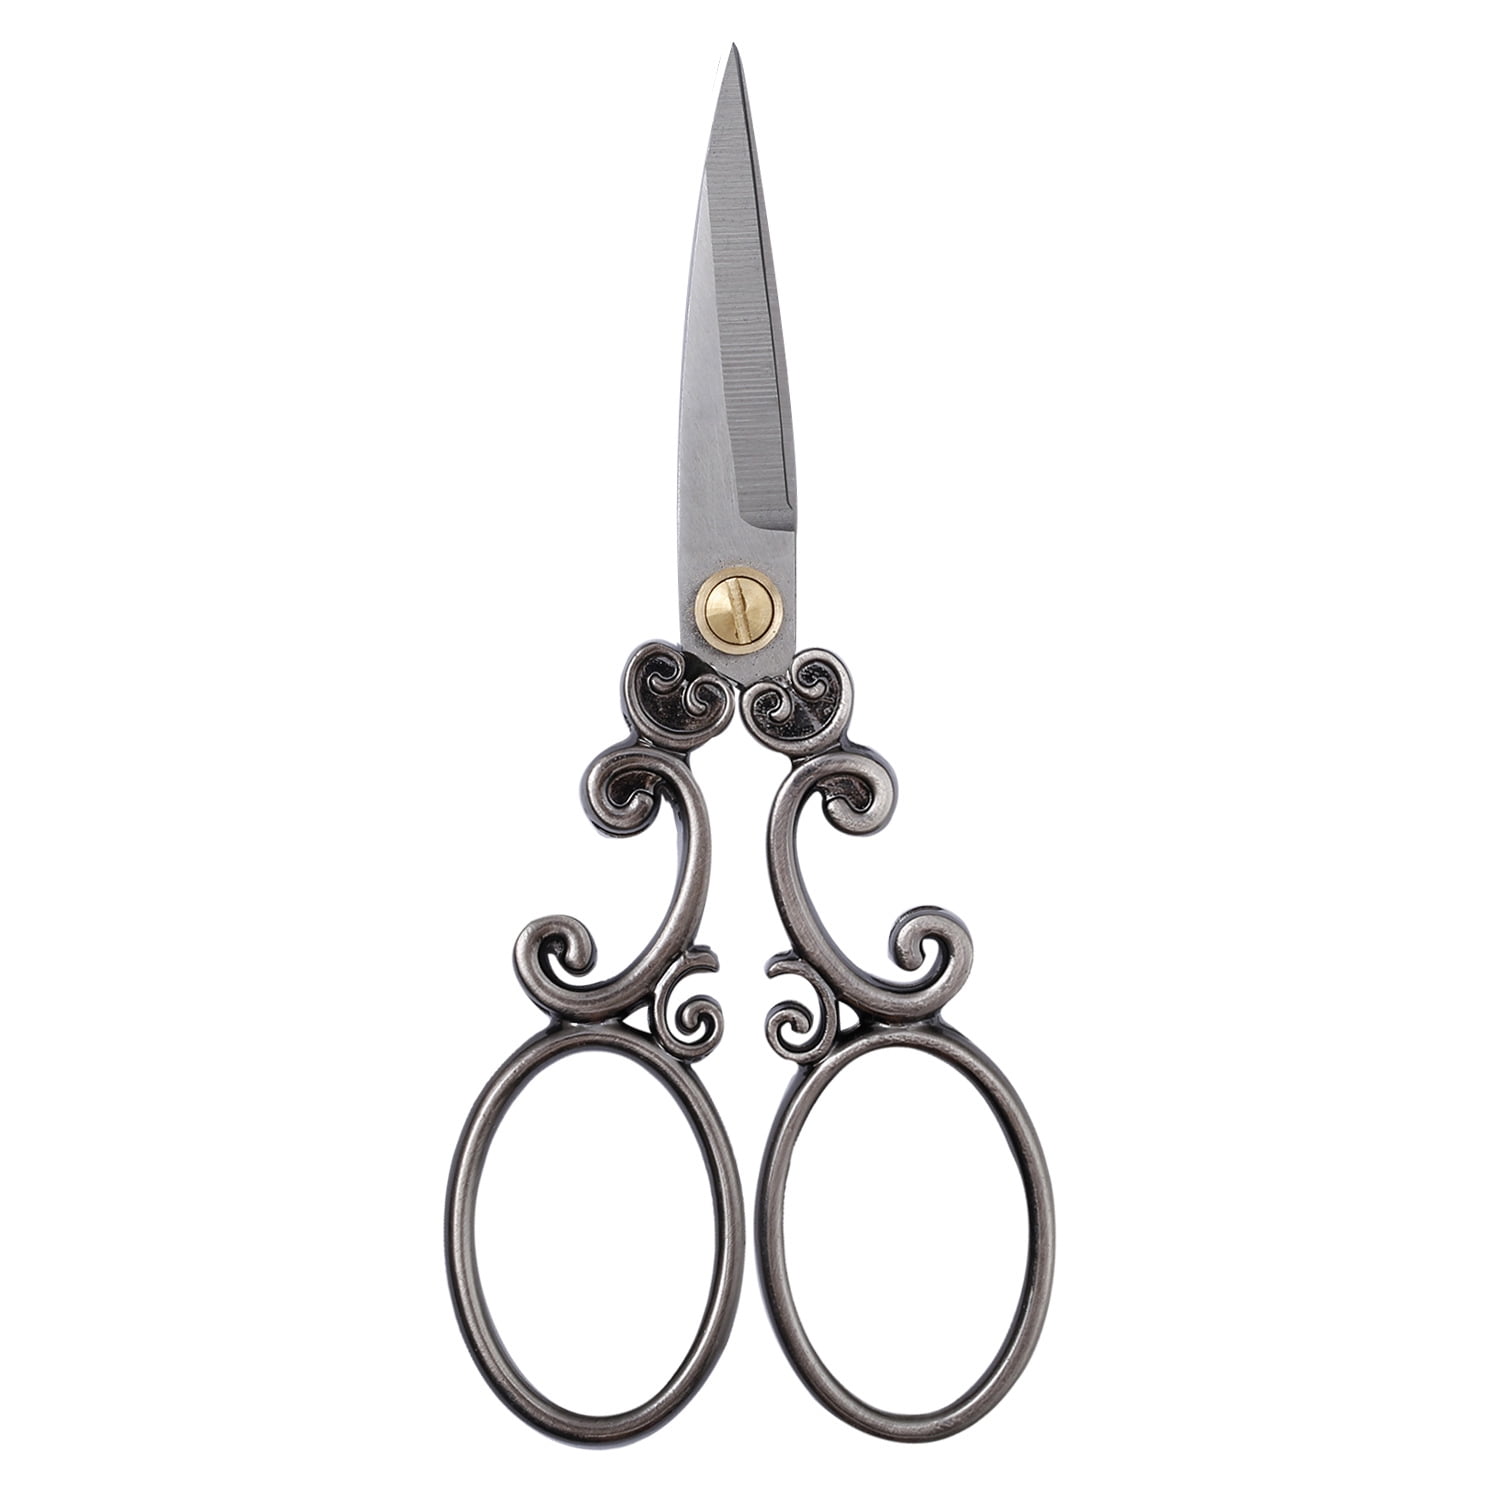 Souarts Vintage European Style Stainless Steel Precision Scissor for Embroidery Sewing Craft Art Work Everyday Use Gold